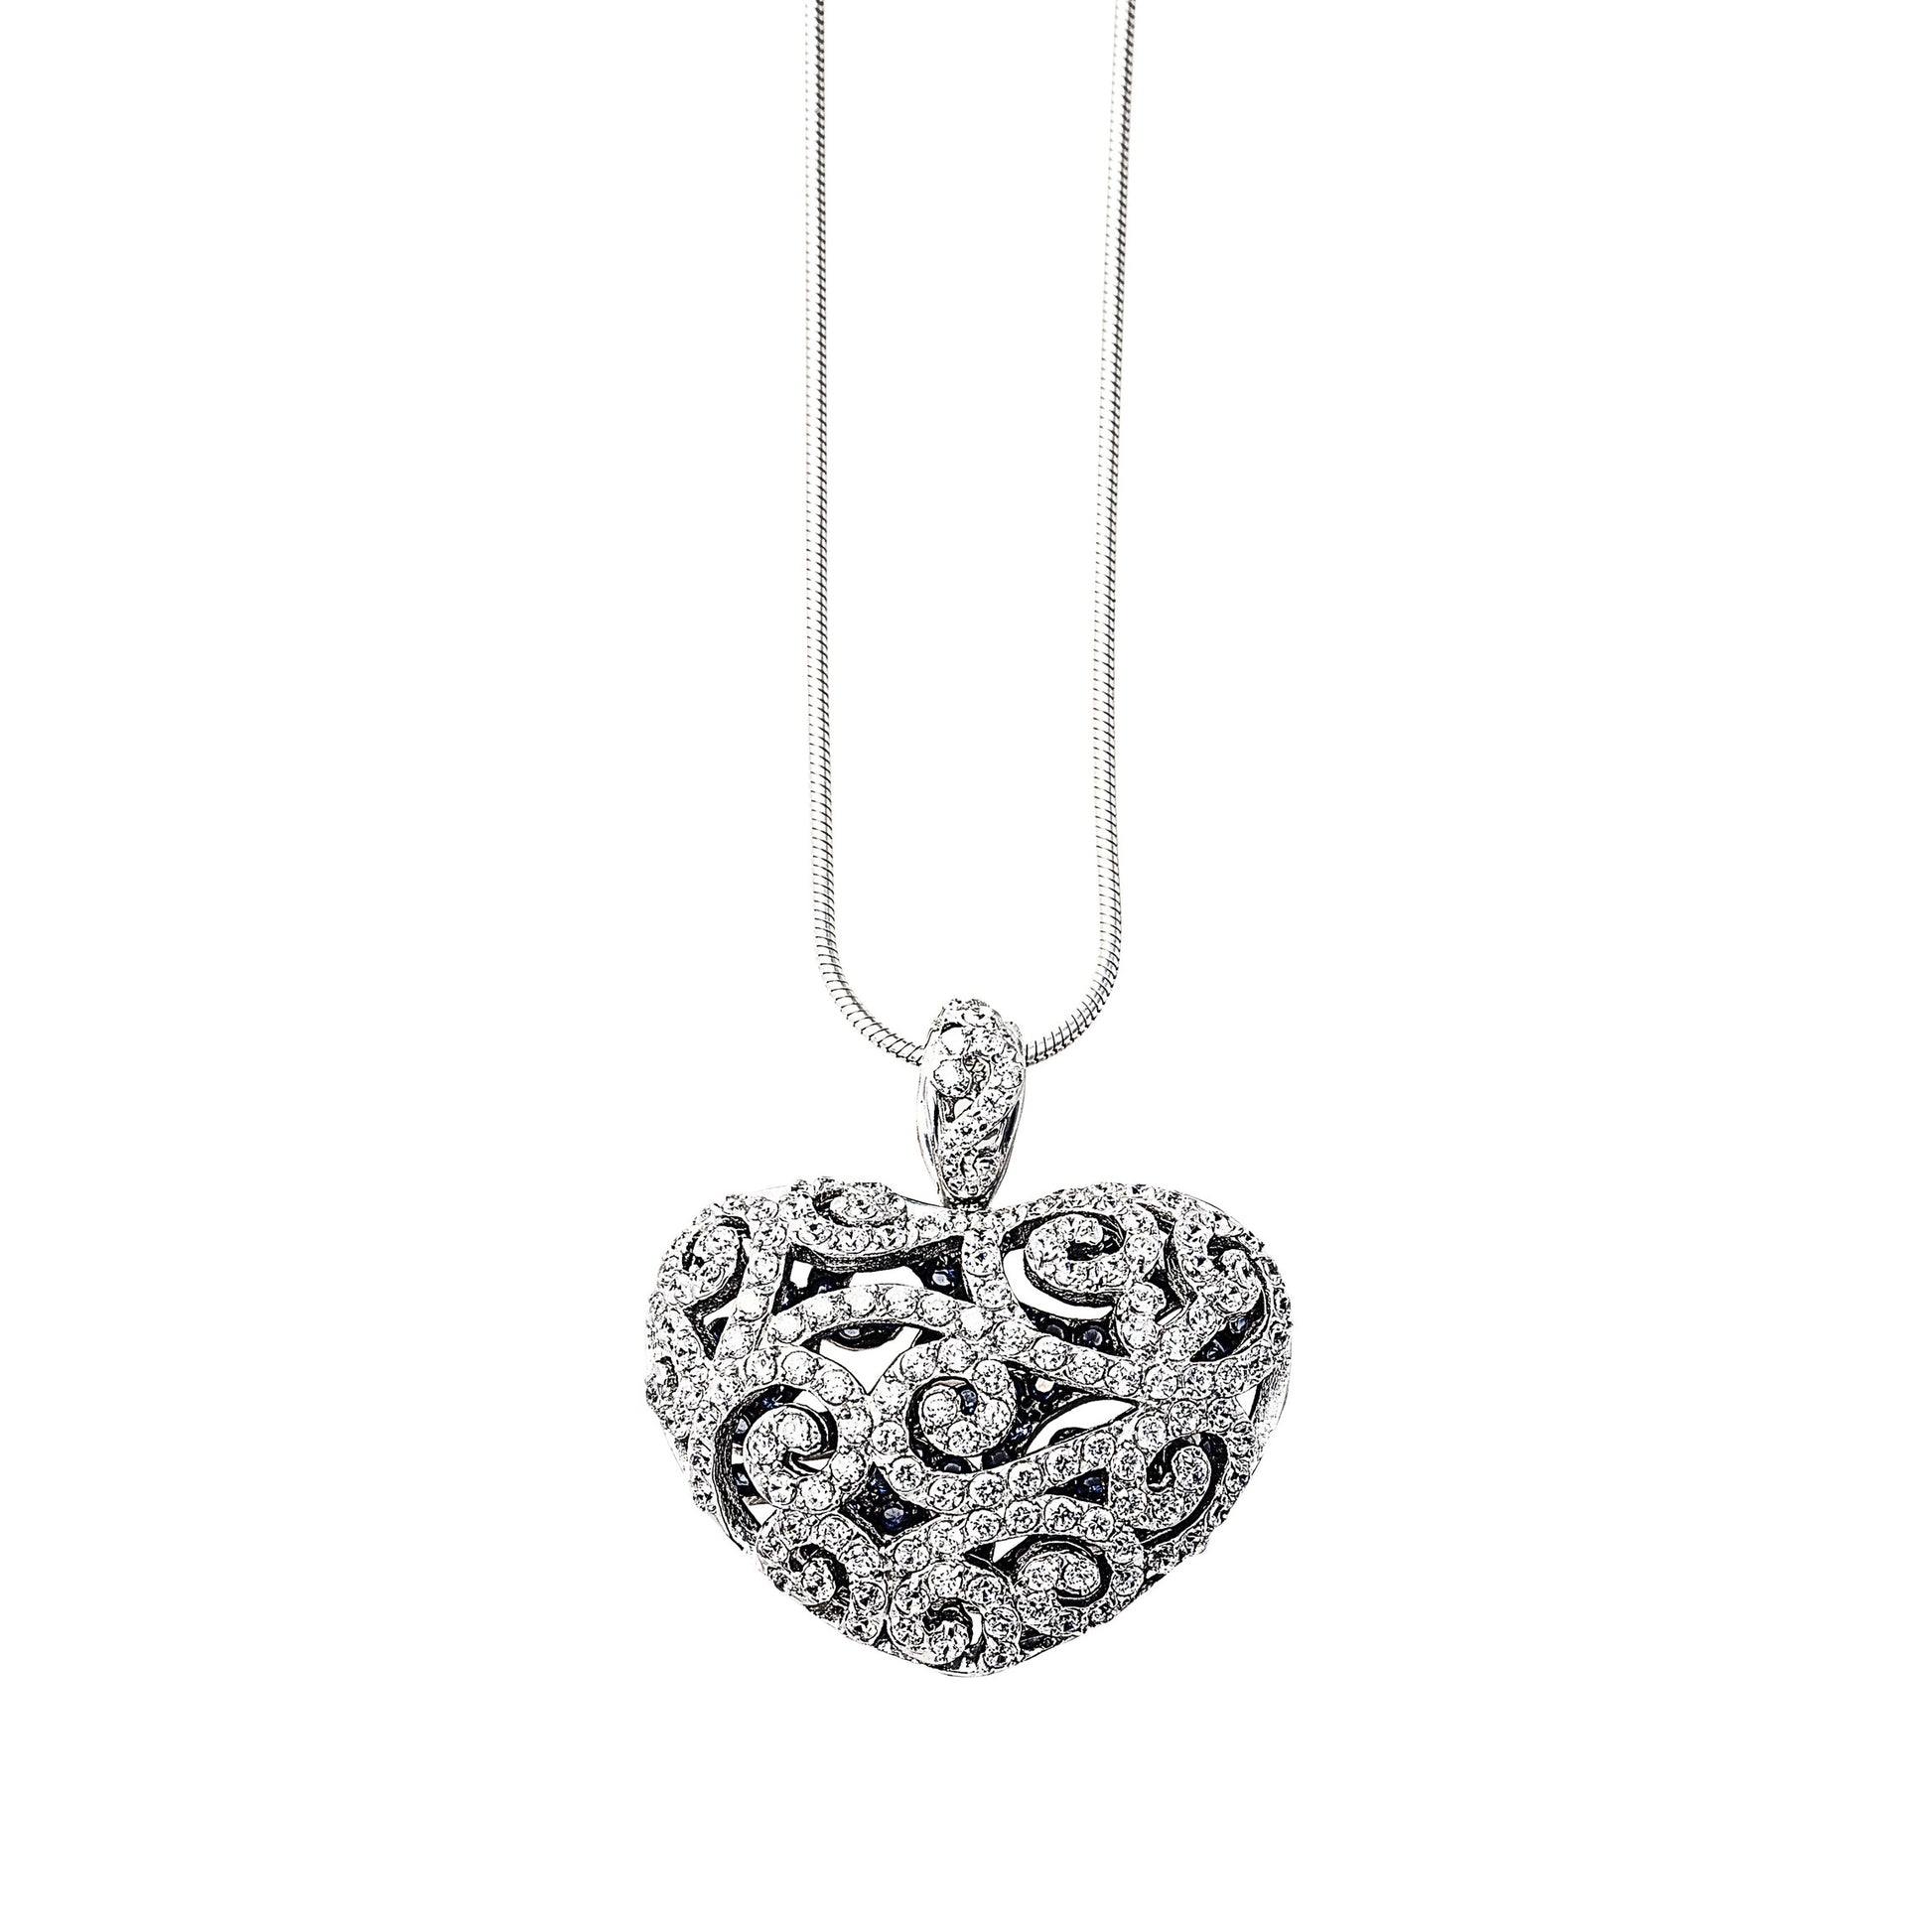 True Romance Necklace in 925 sterling silver. Hollow heart pendant encrusted with cubic zirconia stones. Worldwide shipping.